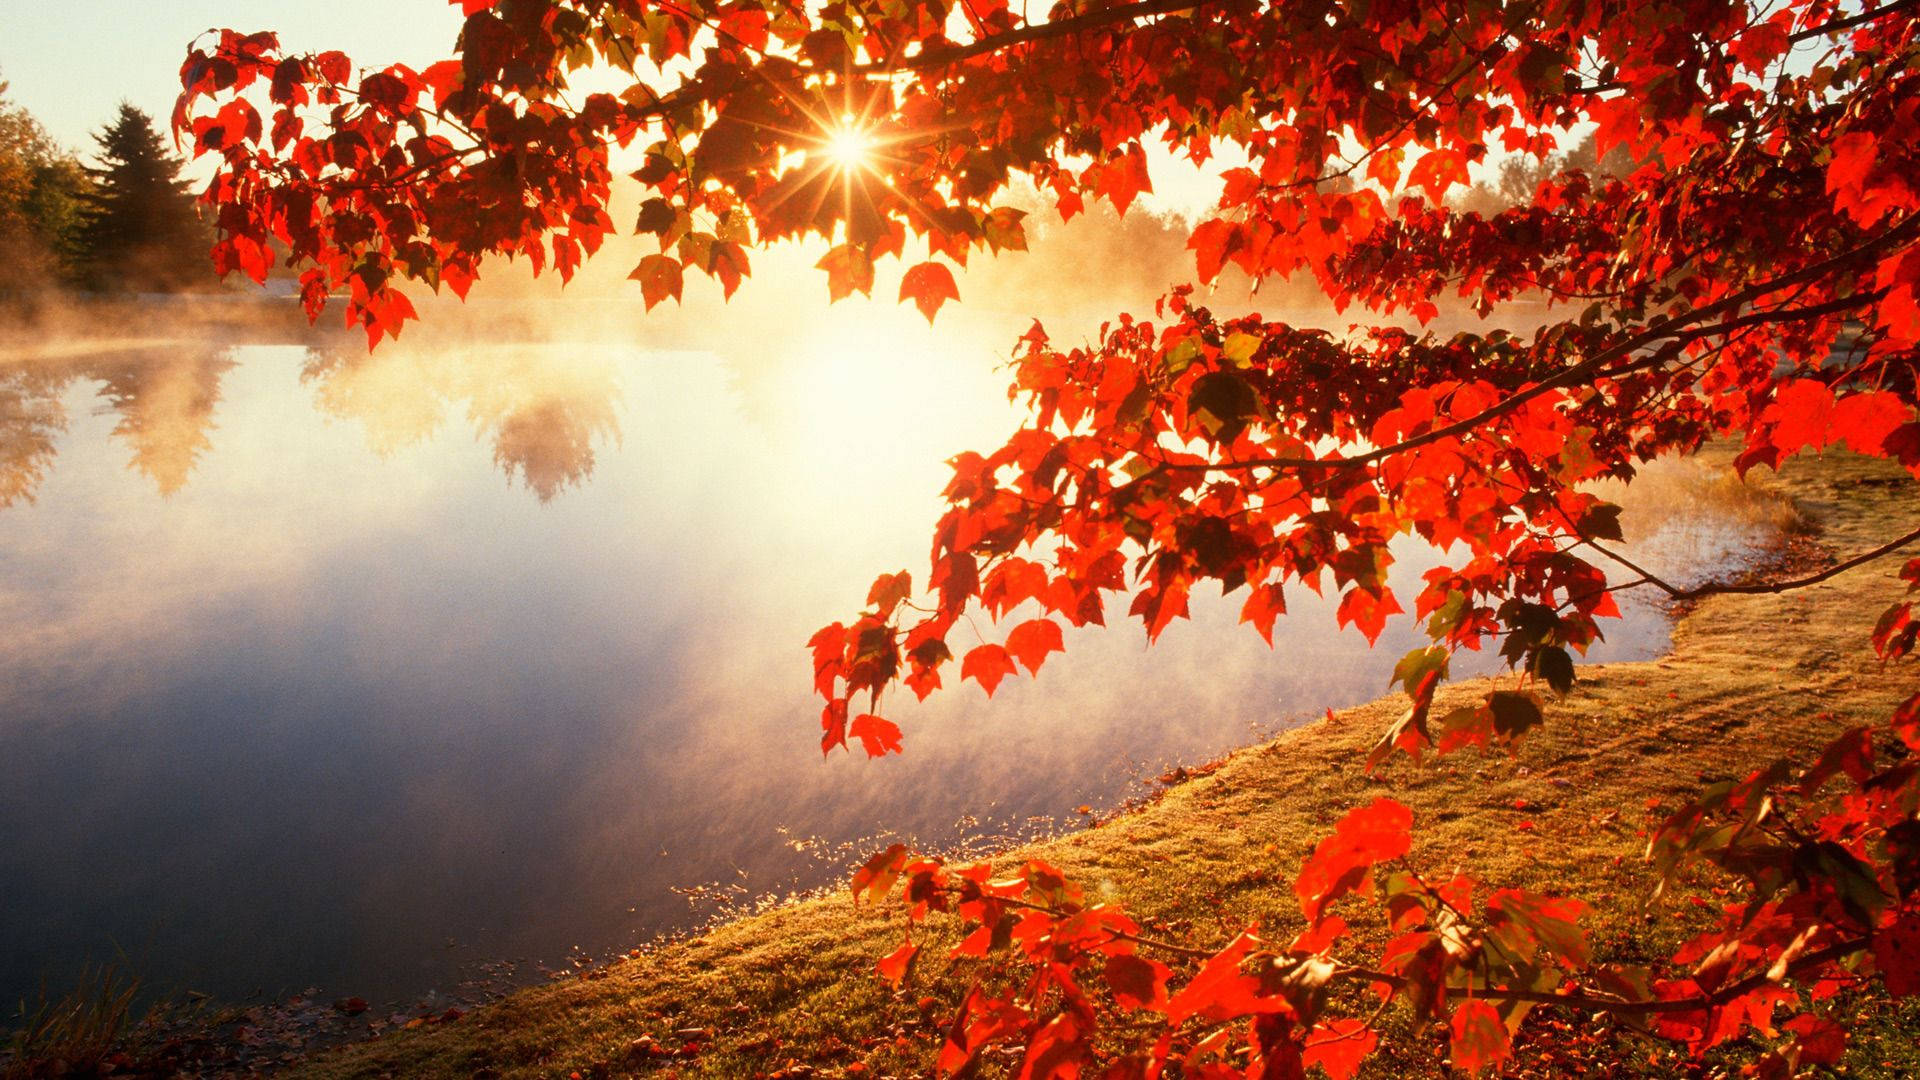 Download Fall Red Autumn Leaves Wallpaper